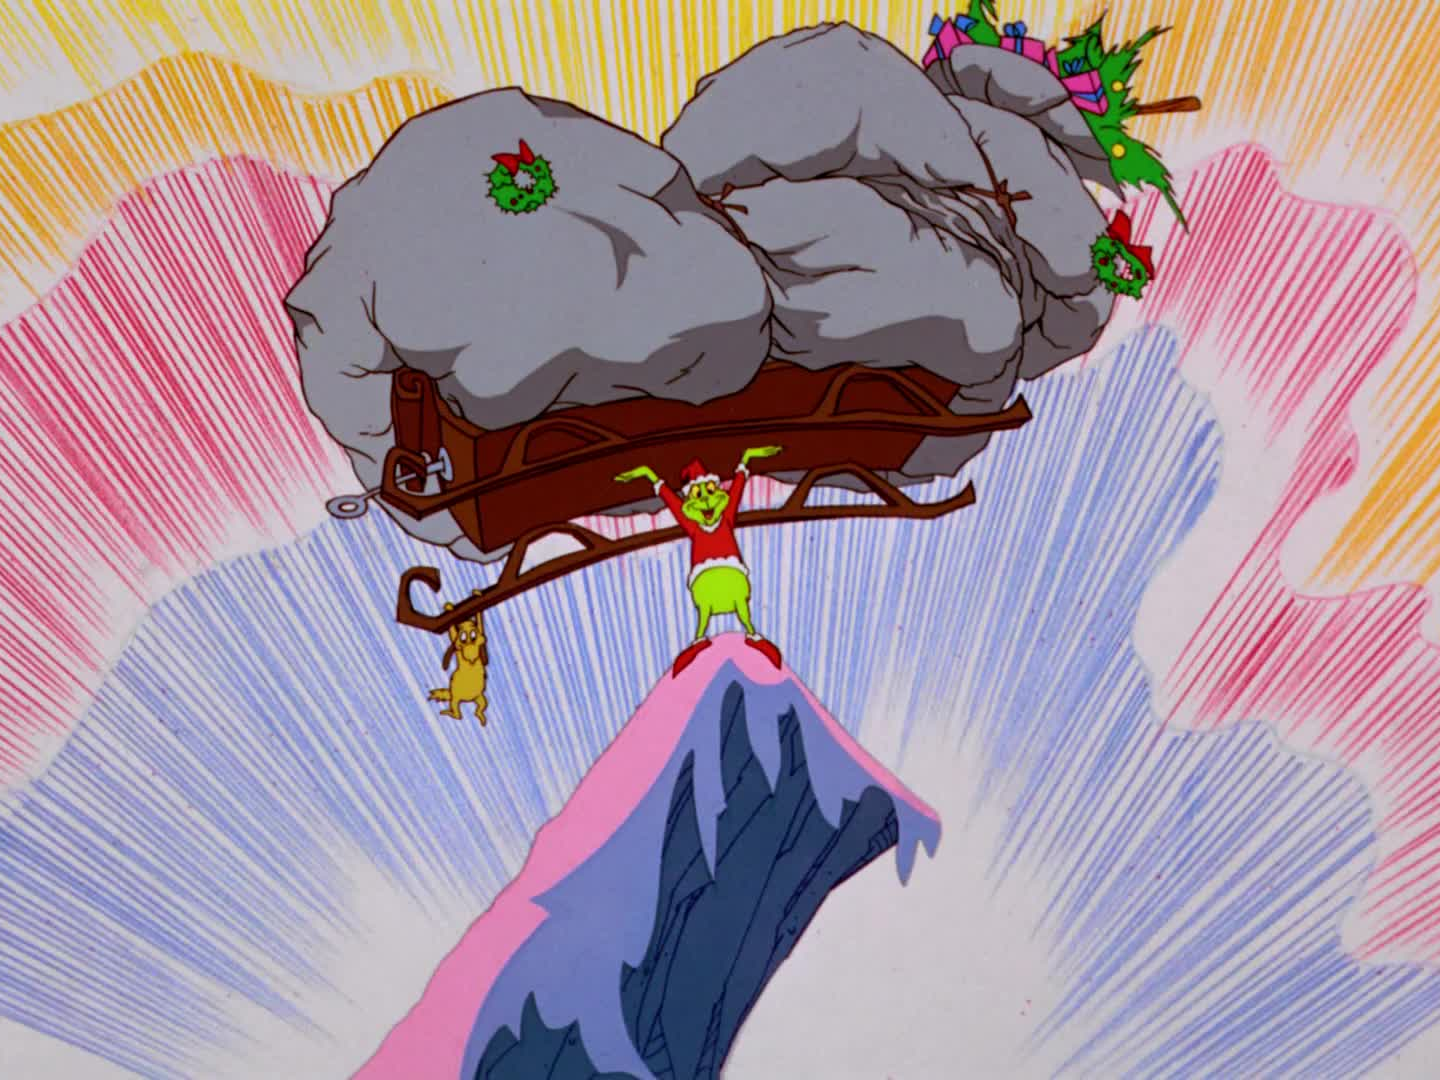 A still from "How The Grinch Stole Christmas!" featuring the grinch dressed as Santa holding up a heavily-laden sleigh at the top of a cliff